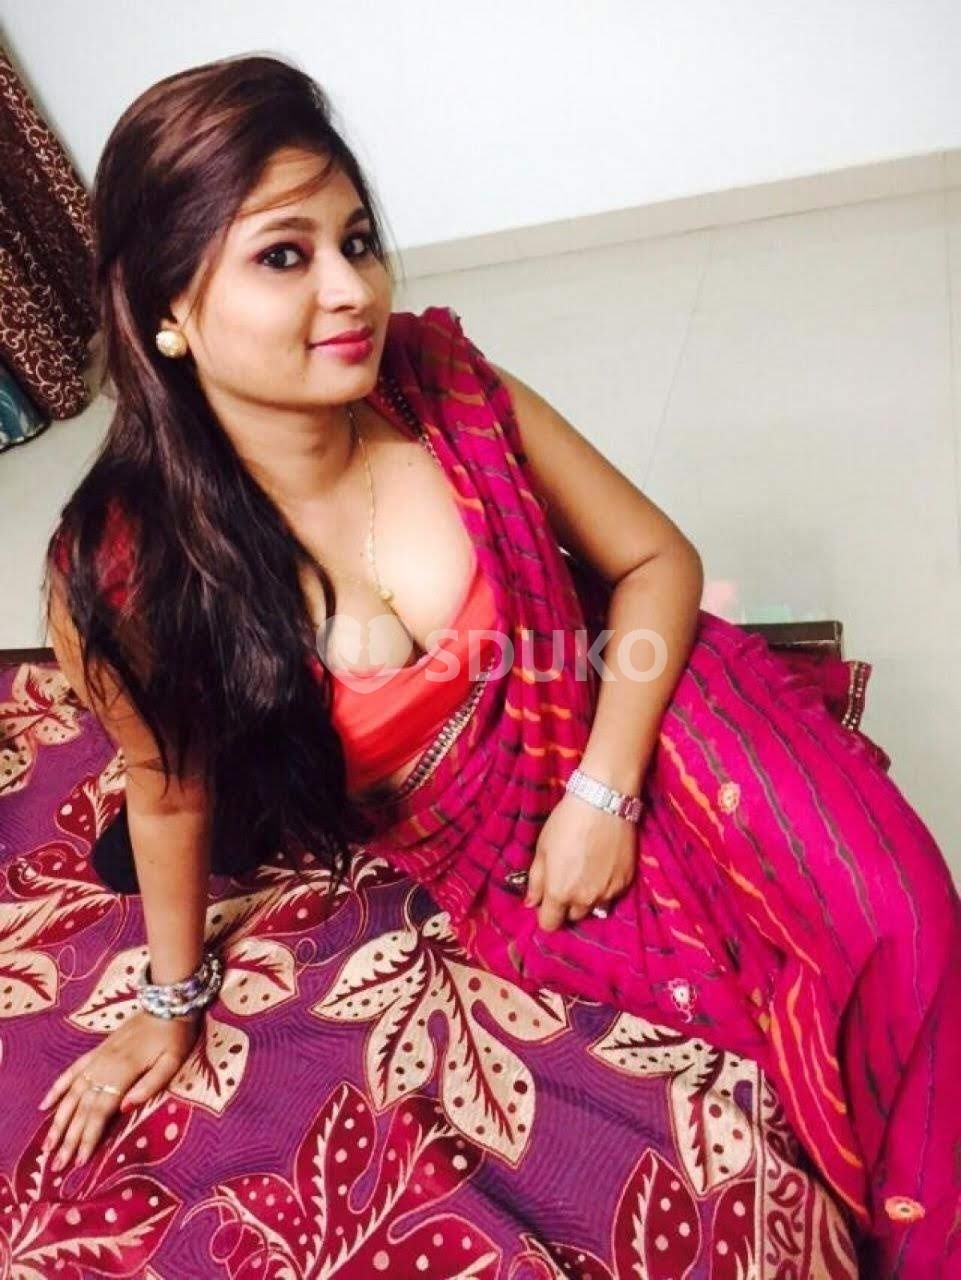 𝗗𝗜𝗩𝗬𝗔 PATHANKOT BEST PROFILE GENUINE INDEPENDENT CALL GIRLS SERVICE IN LOW BUDGET FULL SAFE AND SE⭐ ✅